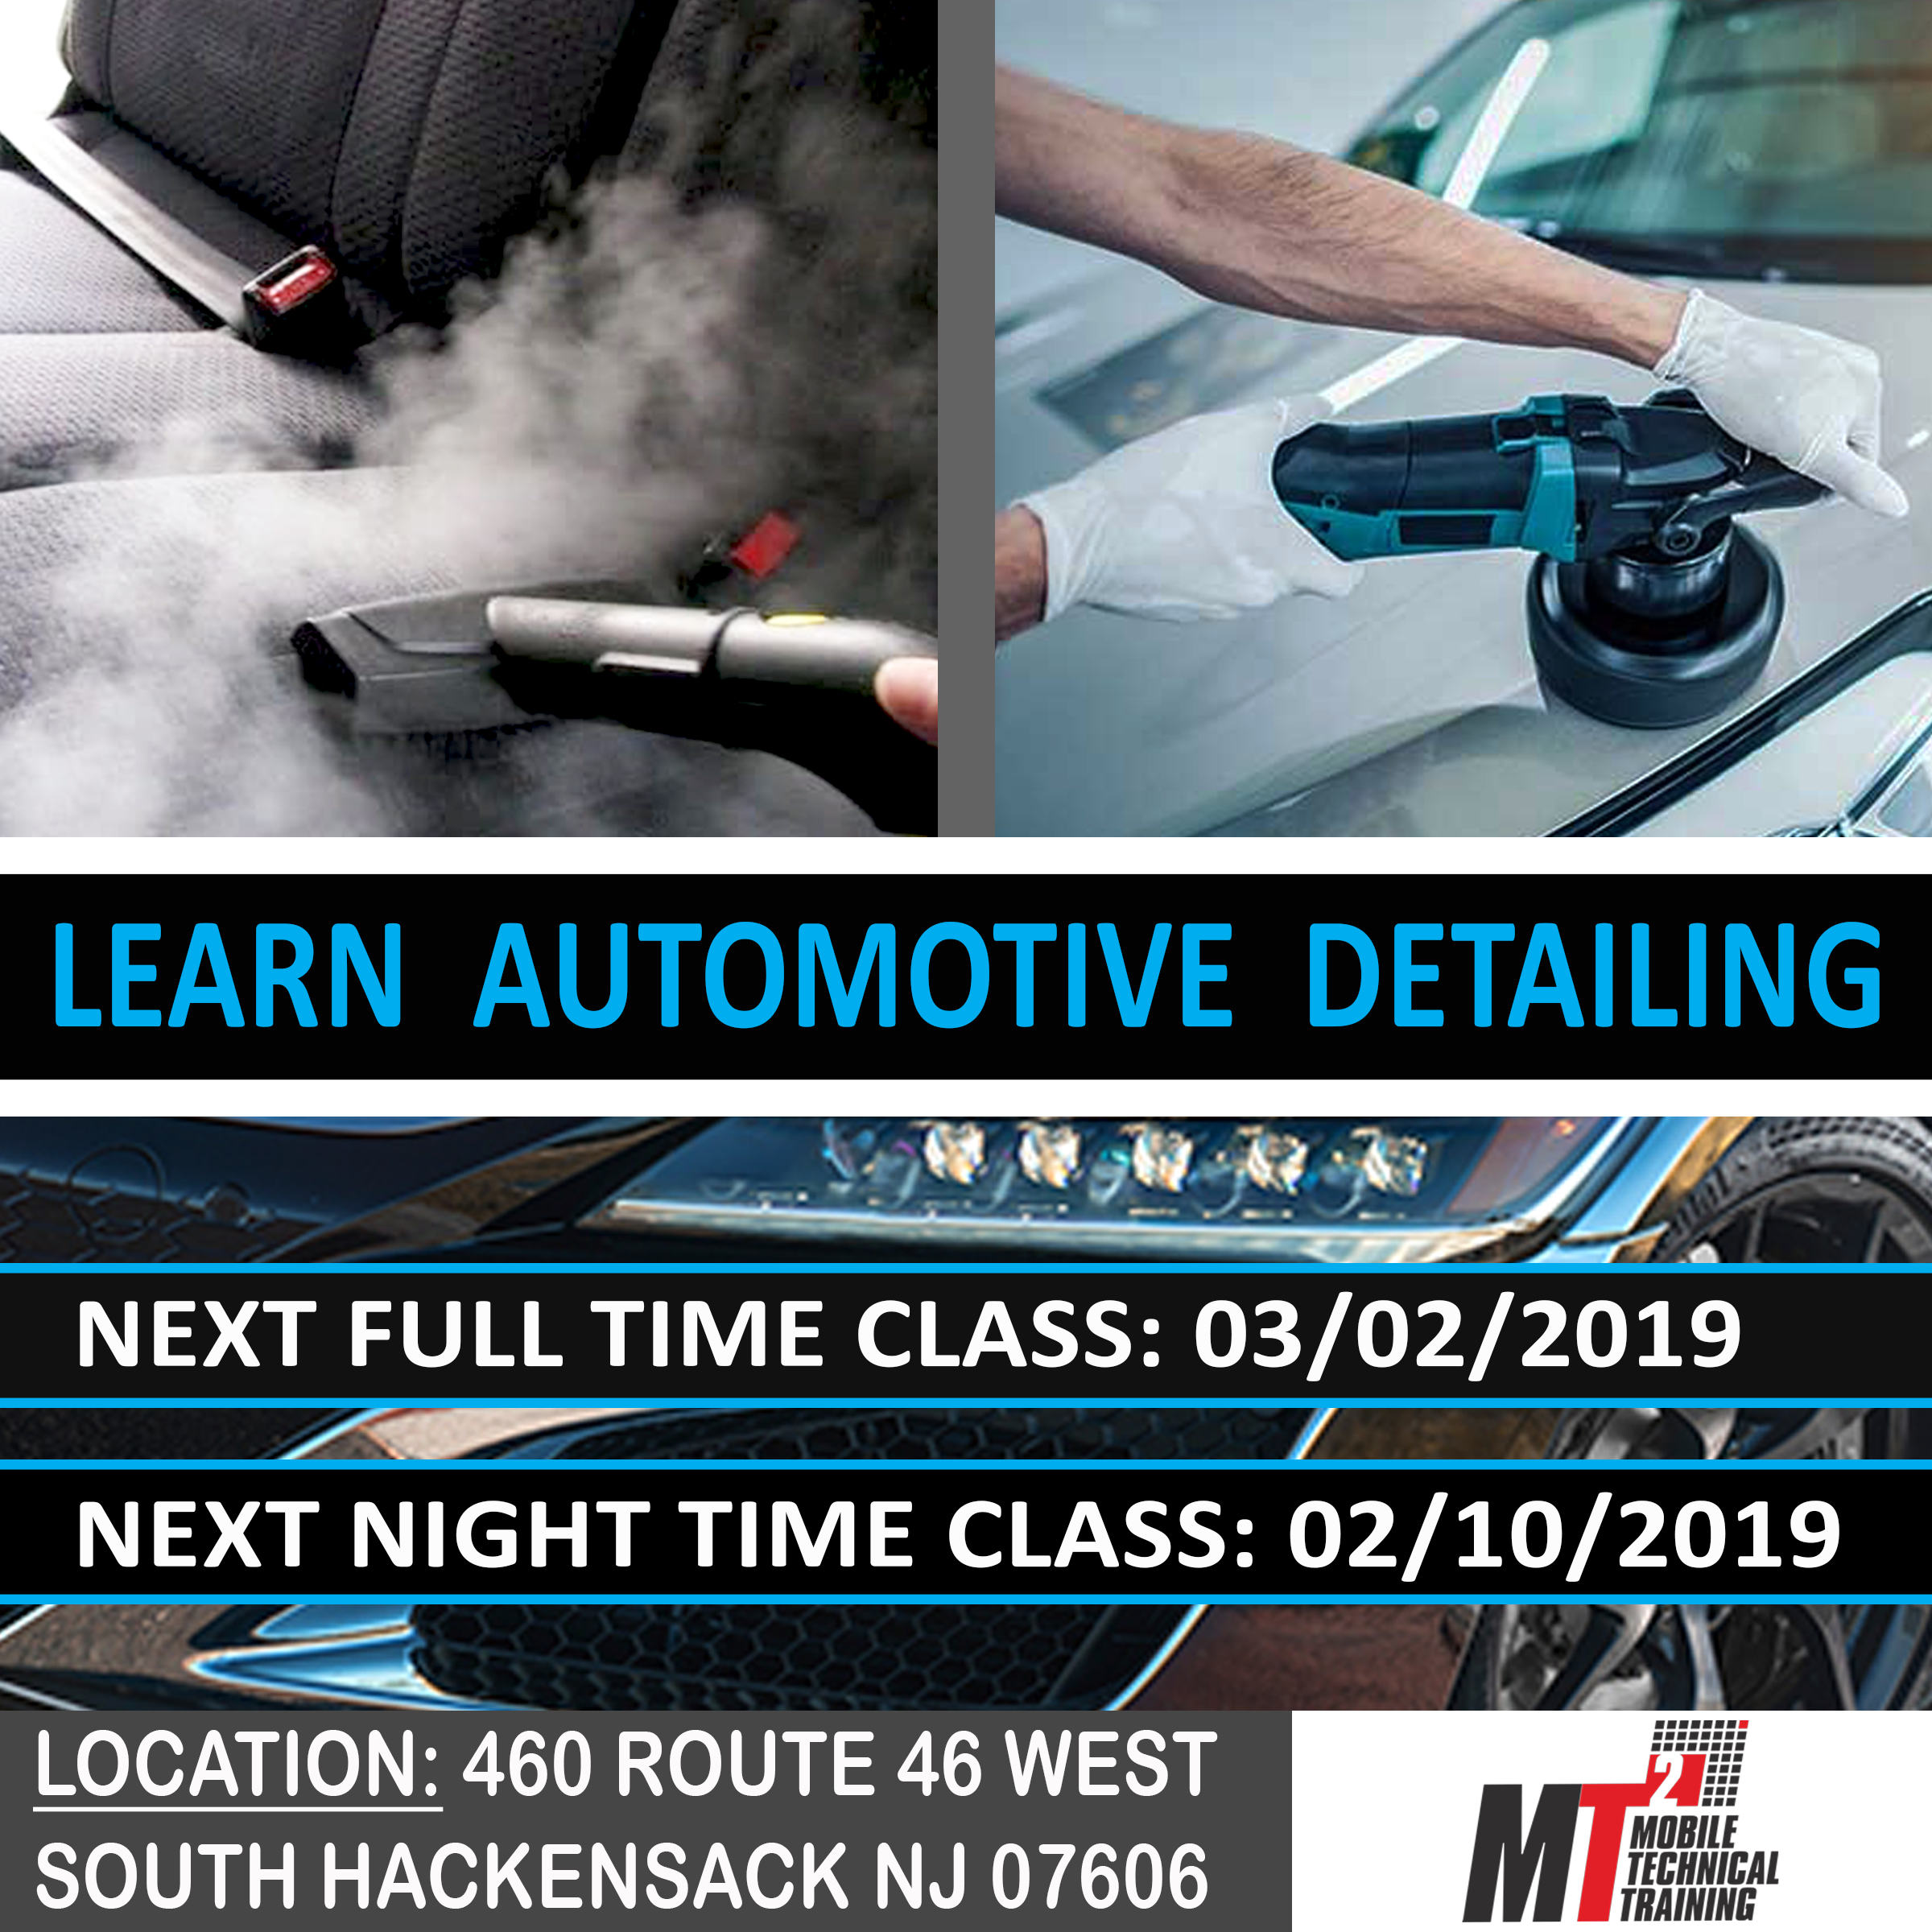 Numeric Morgue deeply Automotive Detailing Classes Are Starting Soon! – Mobile Tech Training